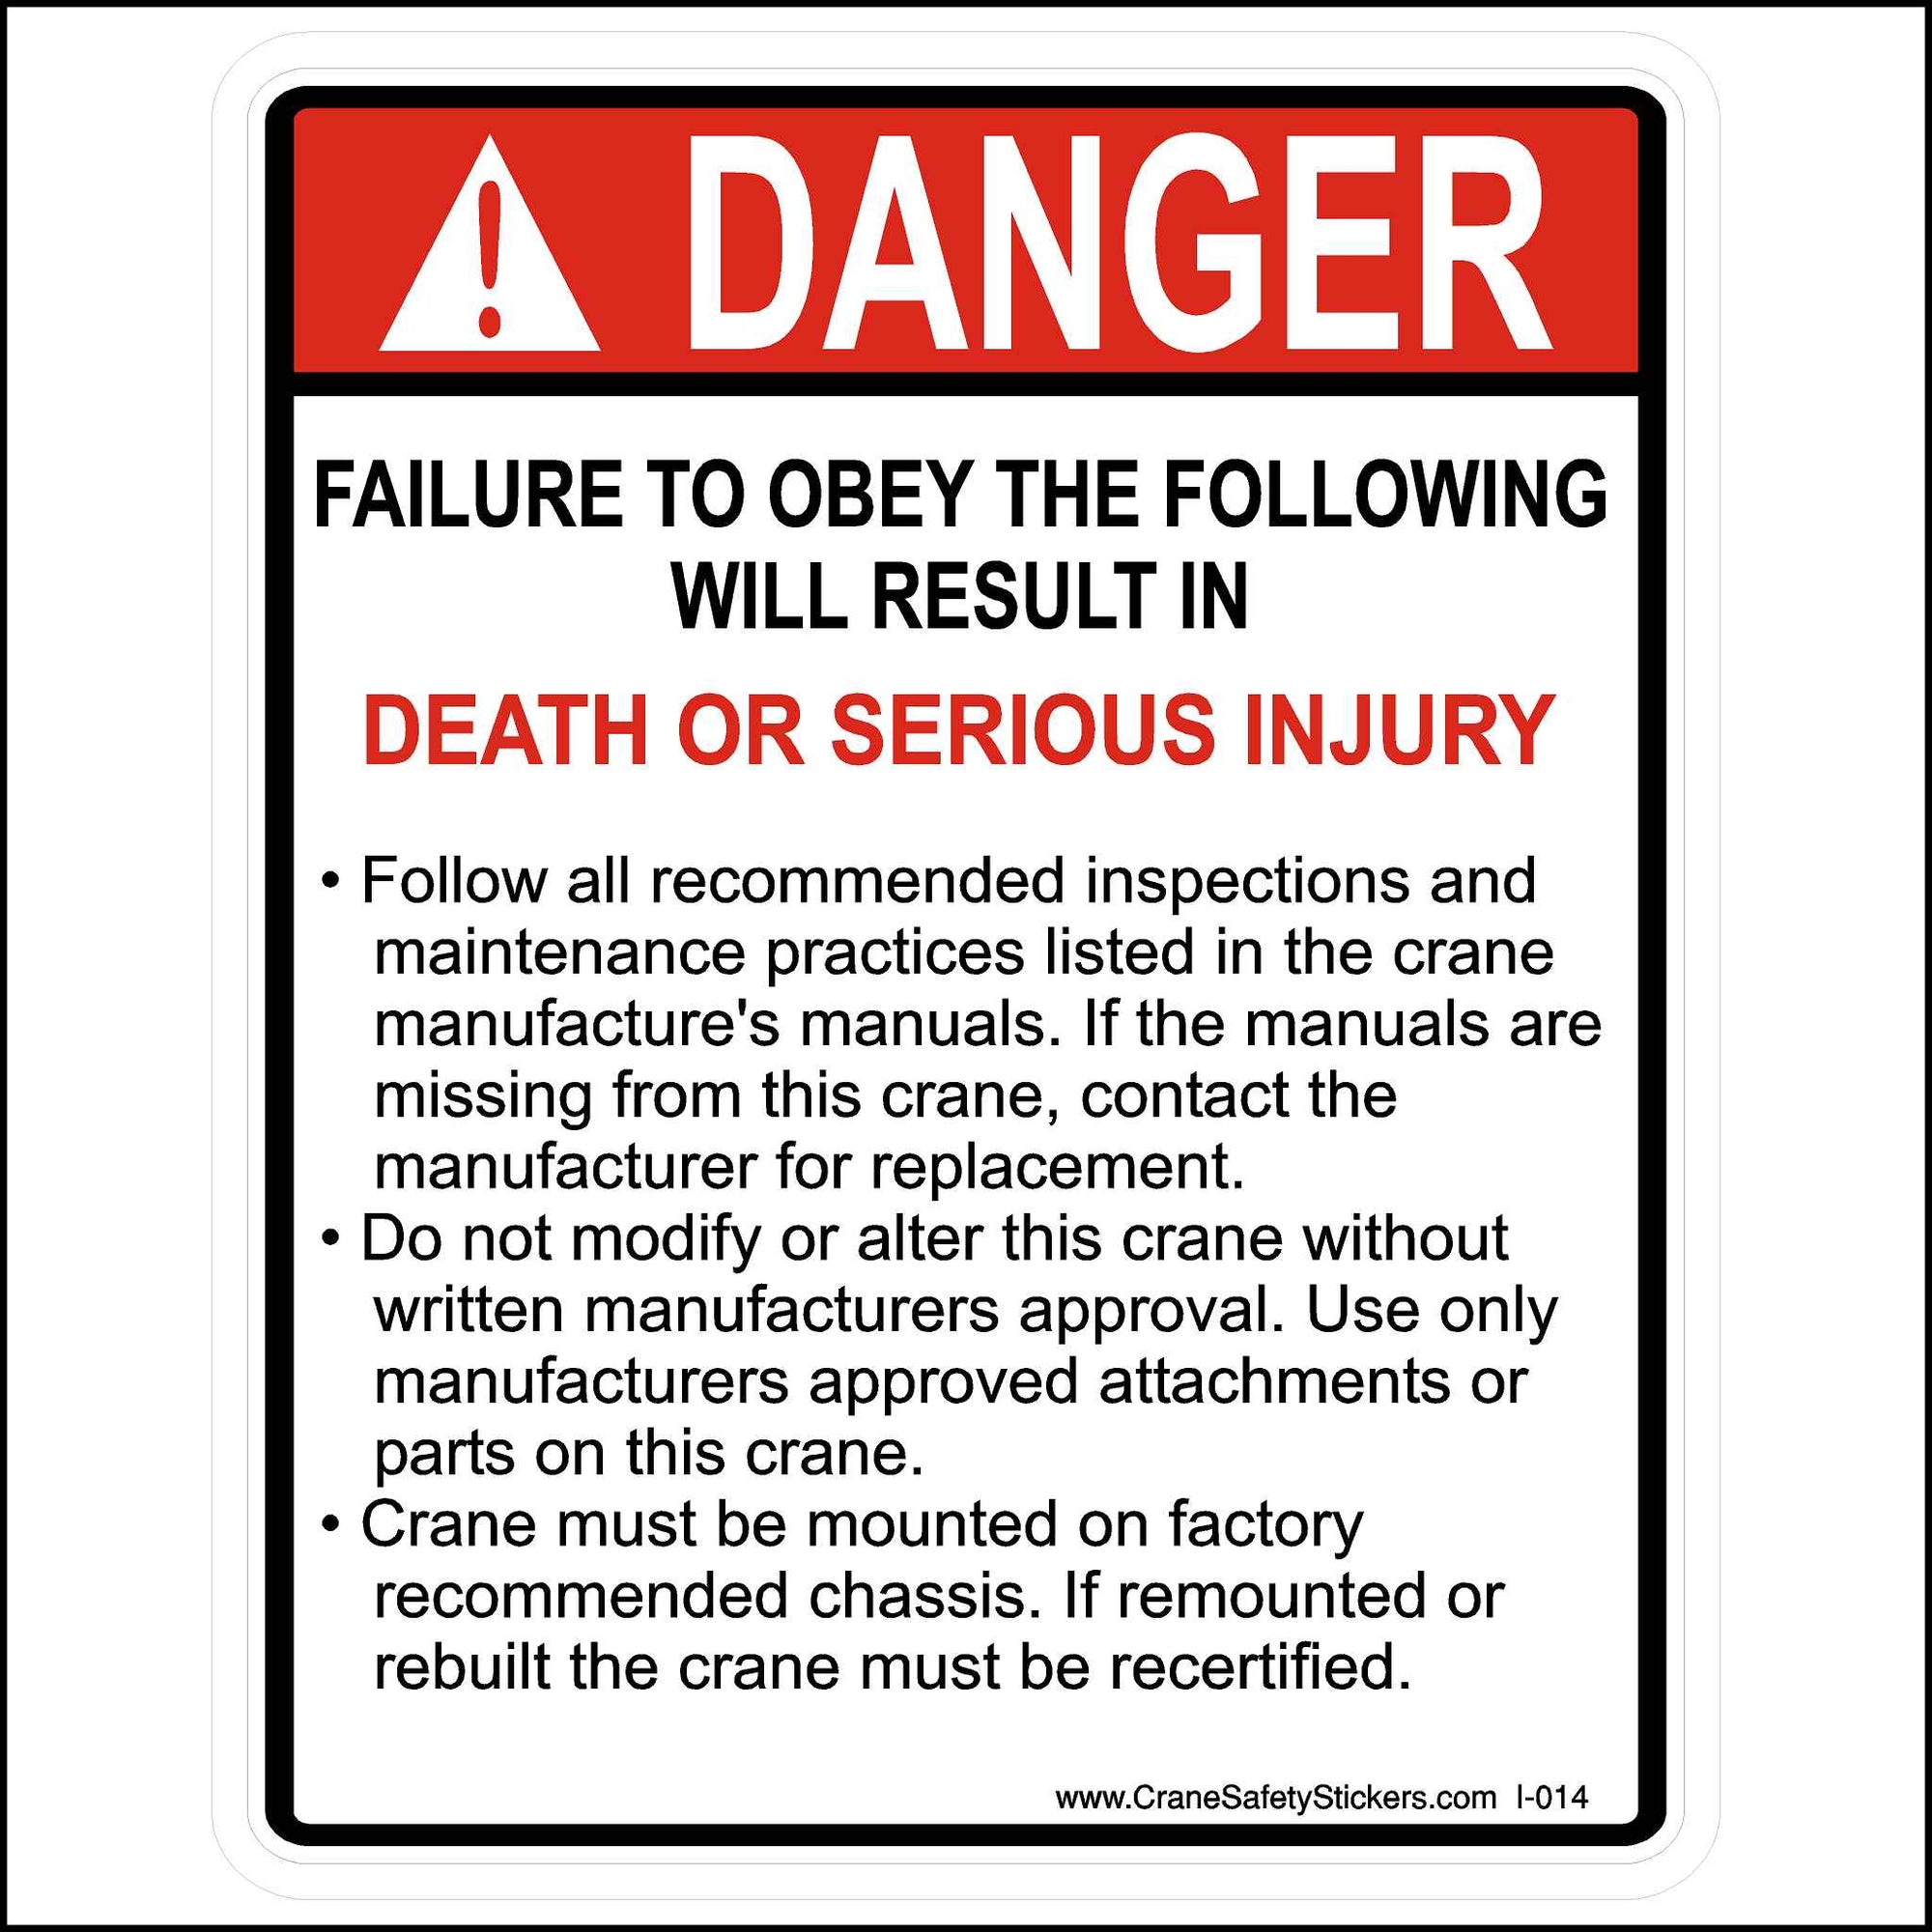 Our Failure To Obey The Following Rules Sticker is Printed With. DANGER Failure to obey the following will result in death or serious injury. • Follow all recommended inspections and maintenance practices listed in the crane manufacture's manuals. If the manuals are missing from this crane, contact the manufacturer for replacement.